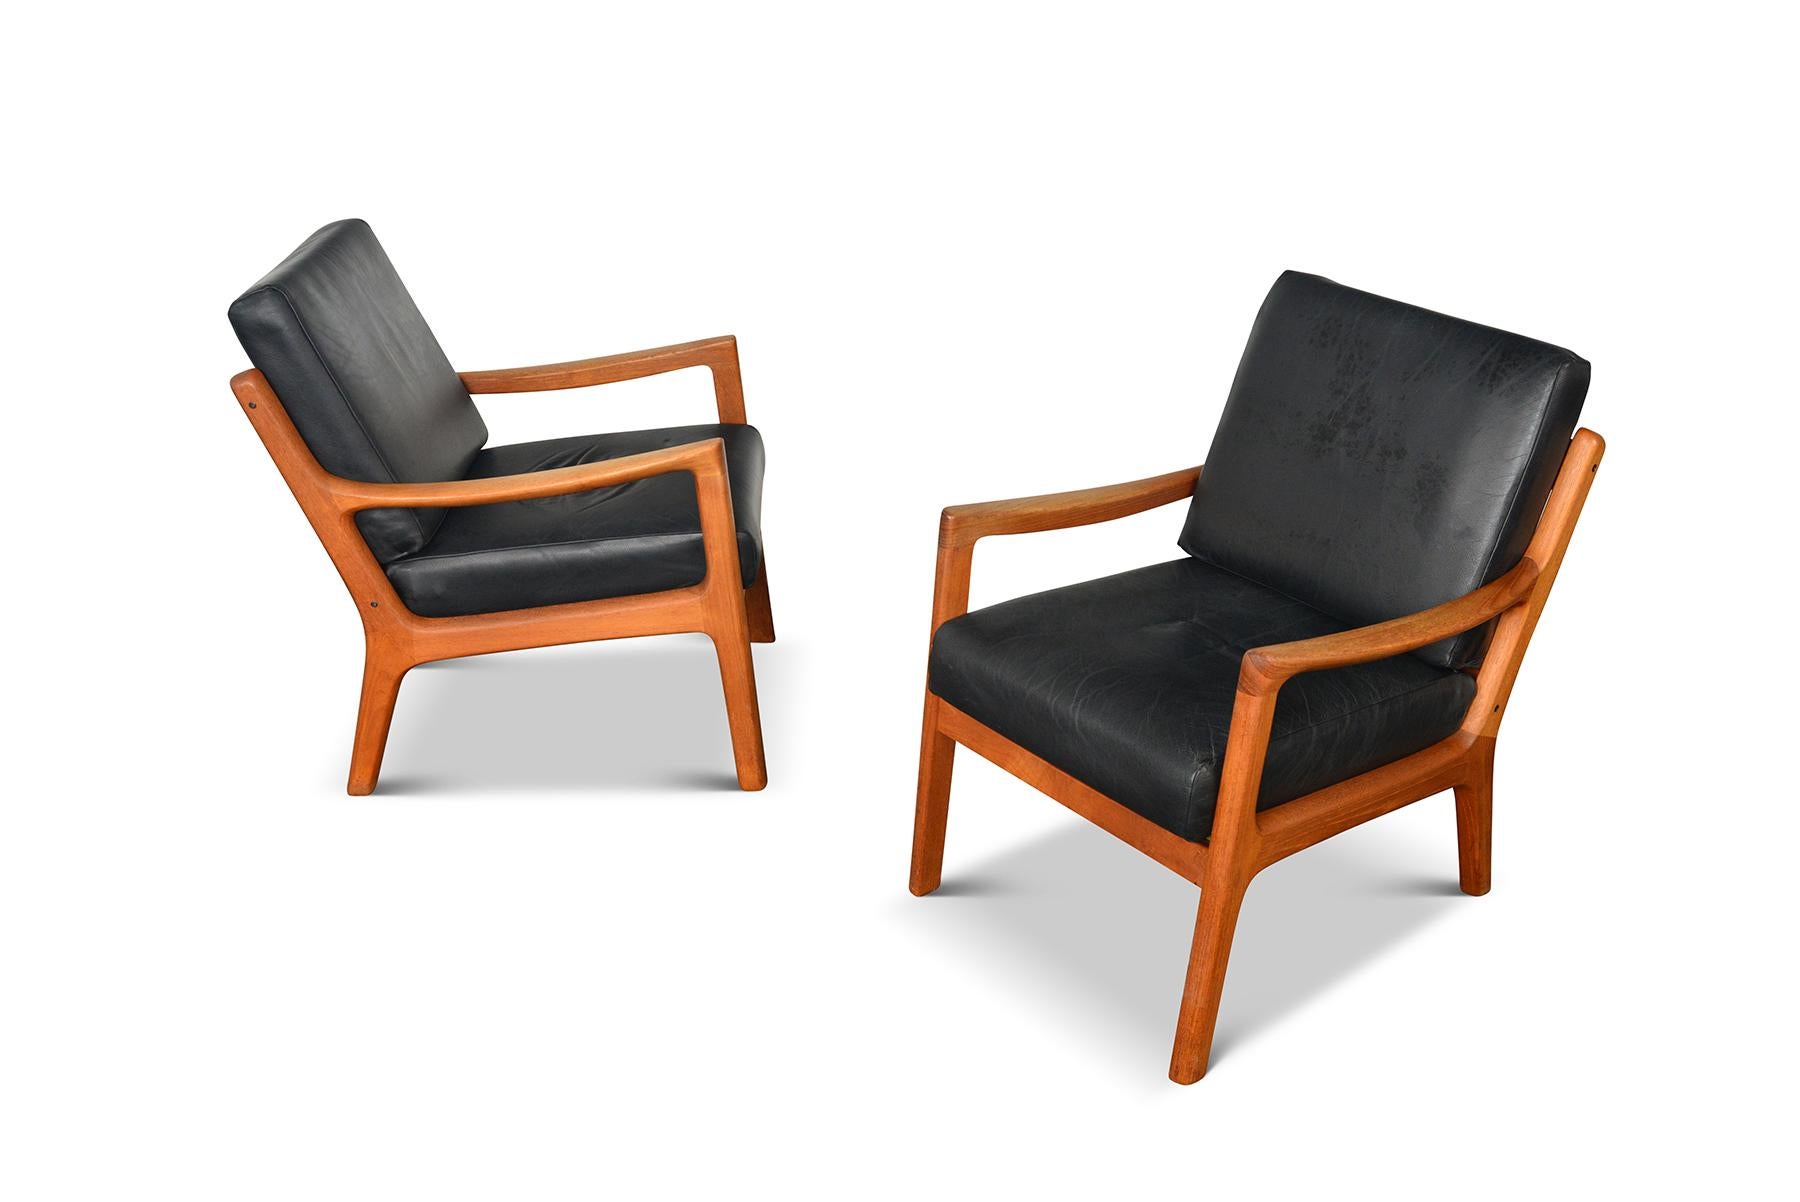 The timeless style of the Senator chairs by Ole Wanscher will add the warmth of vintage to any modern home. The chairs feature an exquisite blend of solid teak and sumptuous black leather. Enjoy the quality that only 65+ years of craftsmanship can